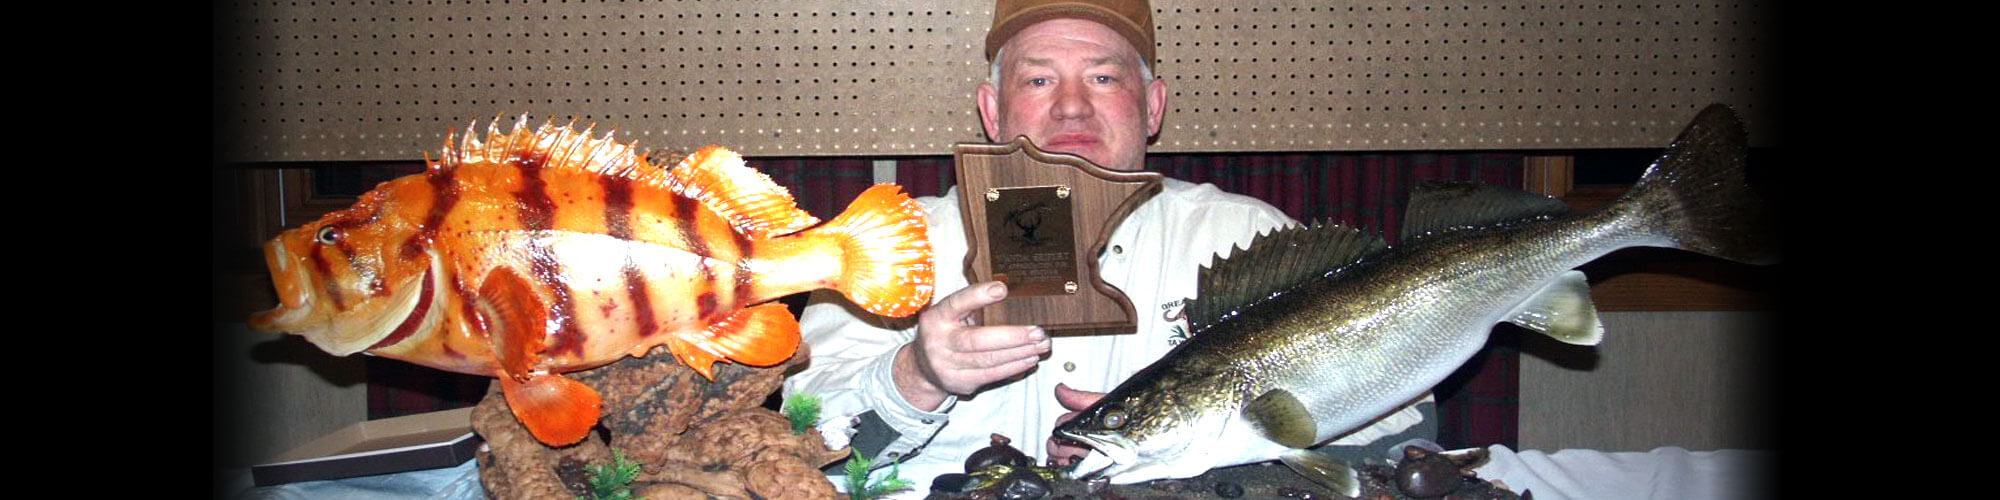 Licensed taxidermist, Mike Kahlert, pictured with awards for various fish mounts that he created